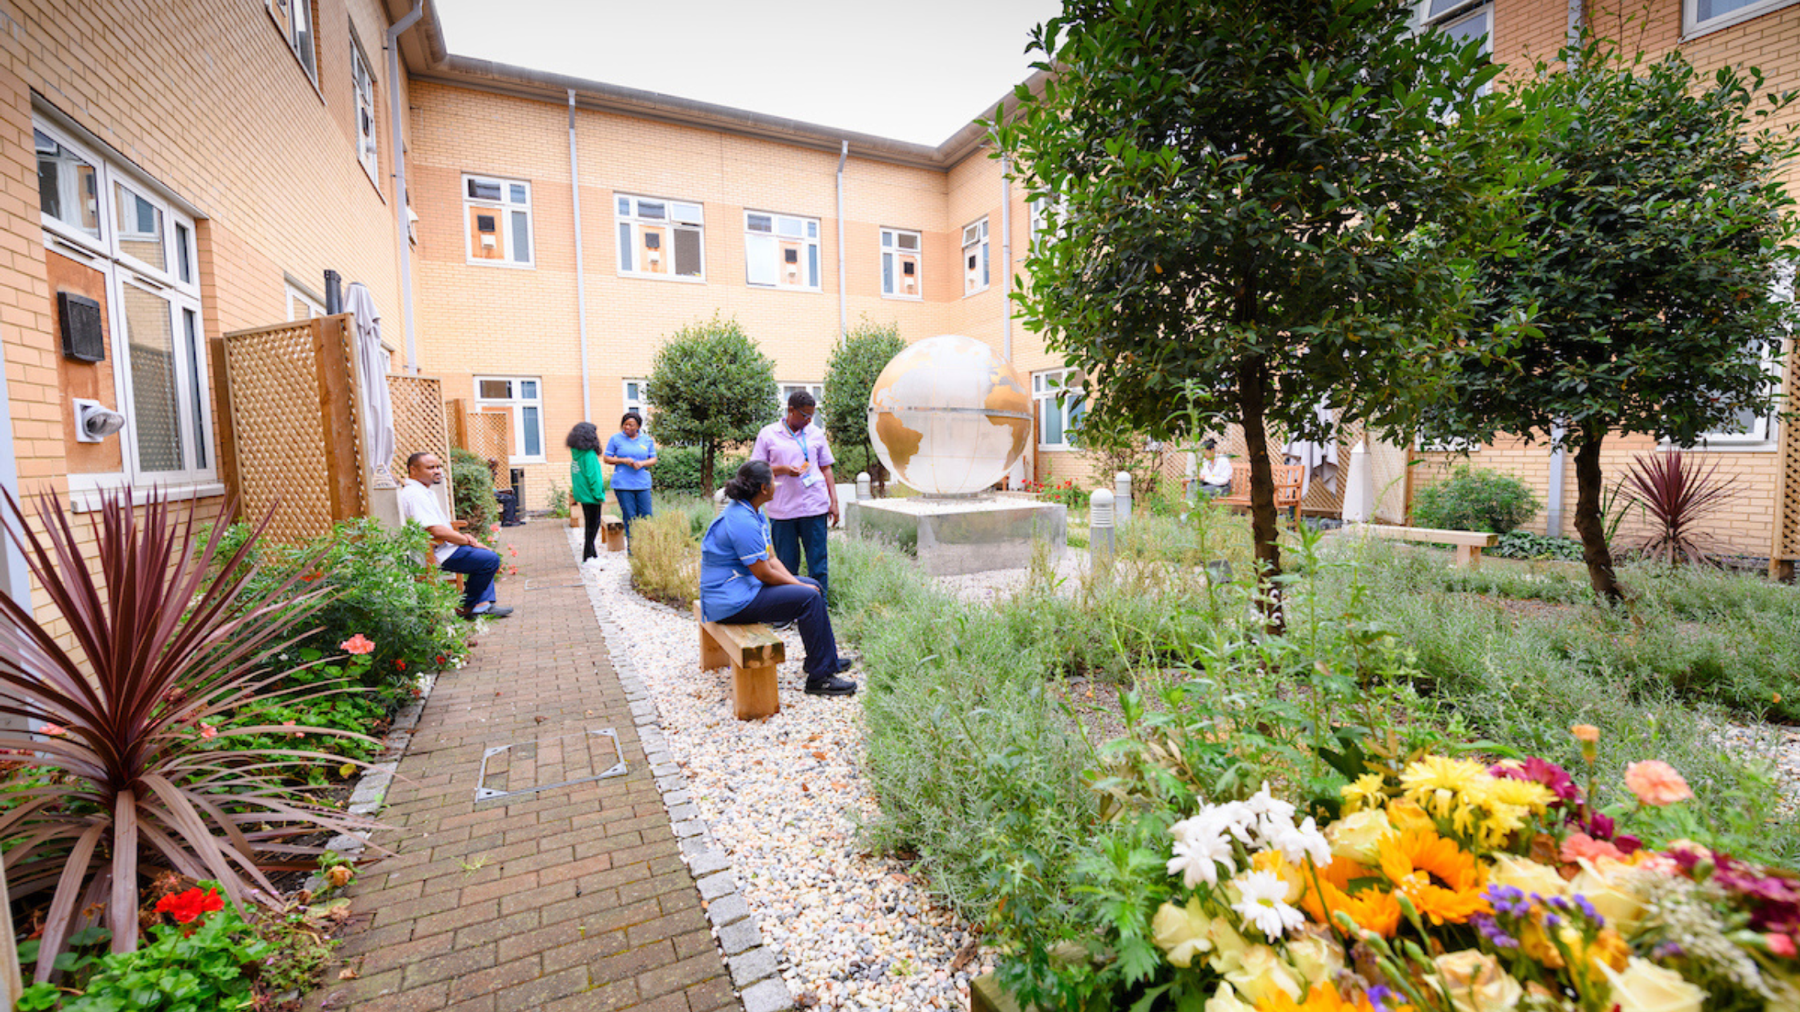 A picture of staff enjoying Newham garden space